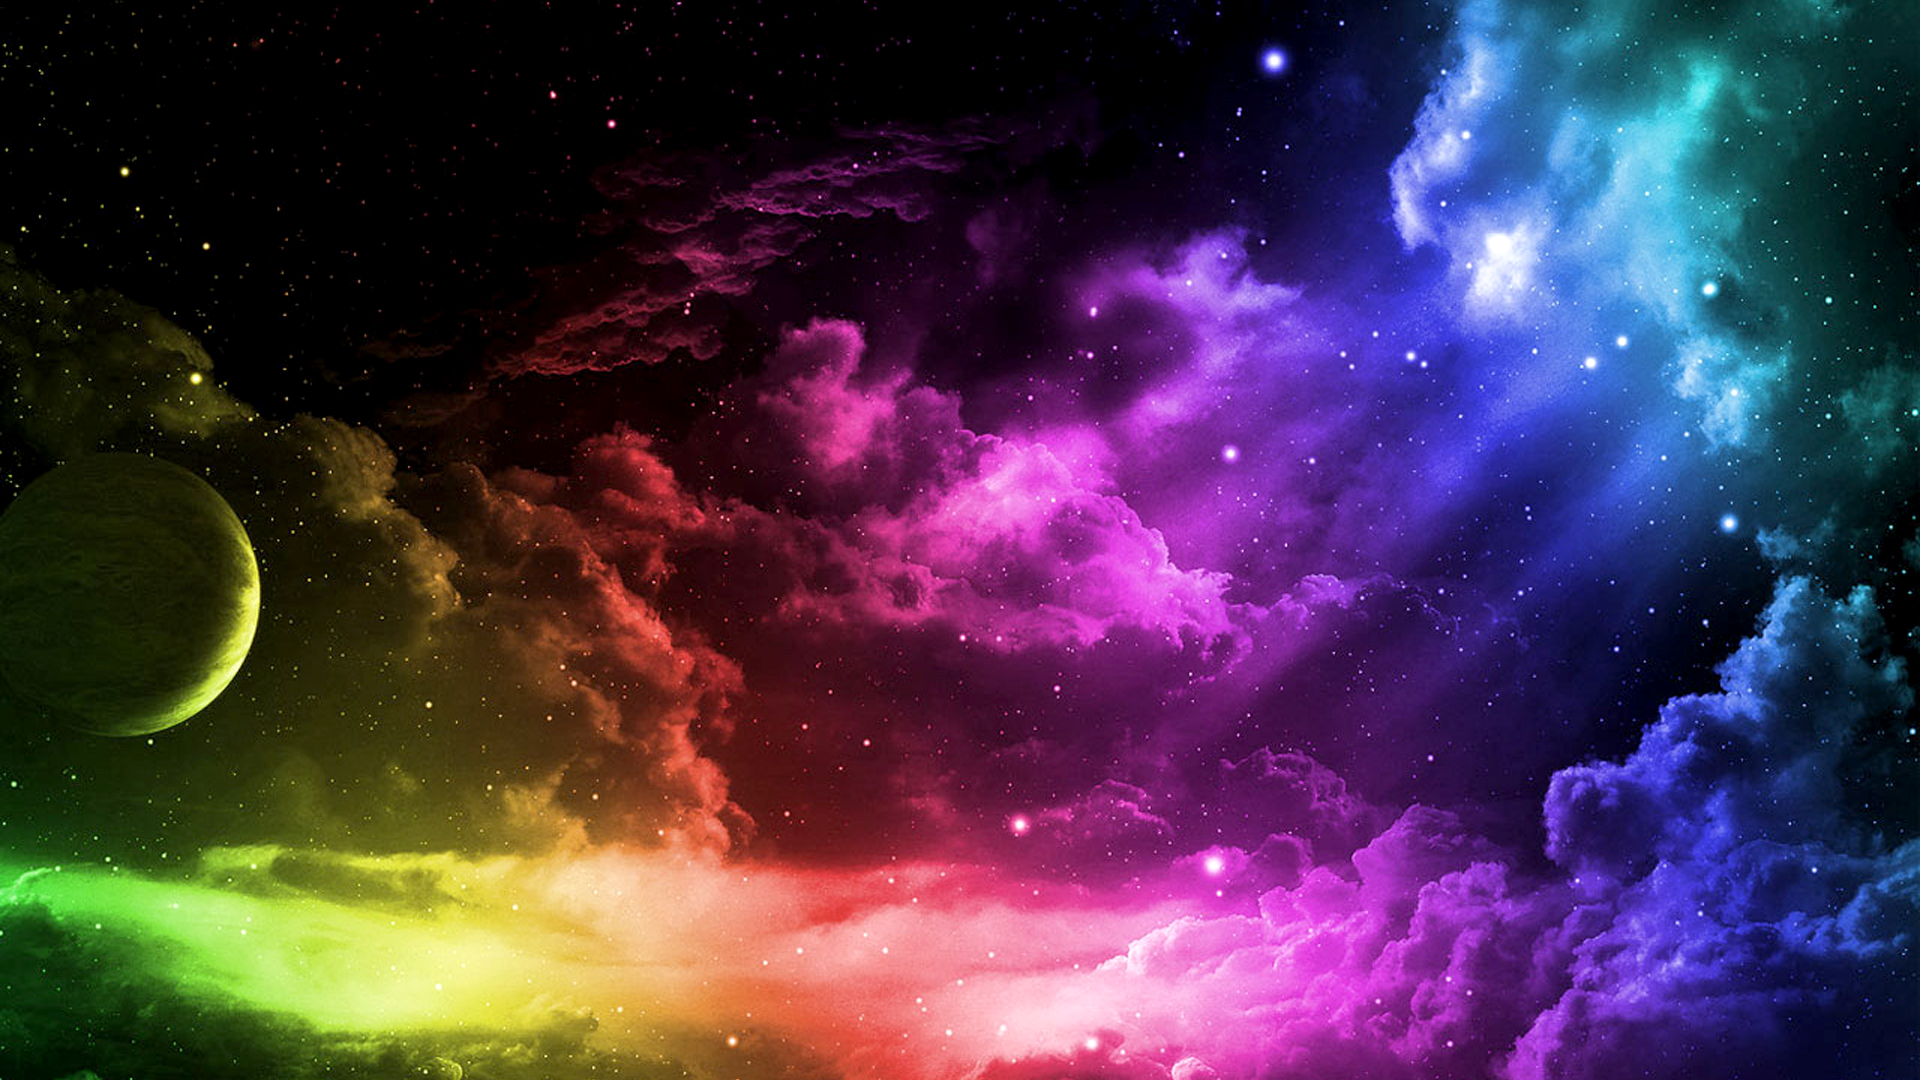 Get colorful backgrounds for your desktop and give it a more 1920x1080